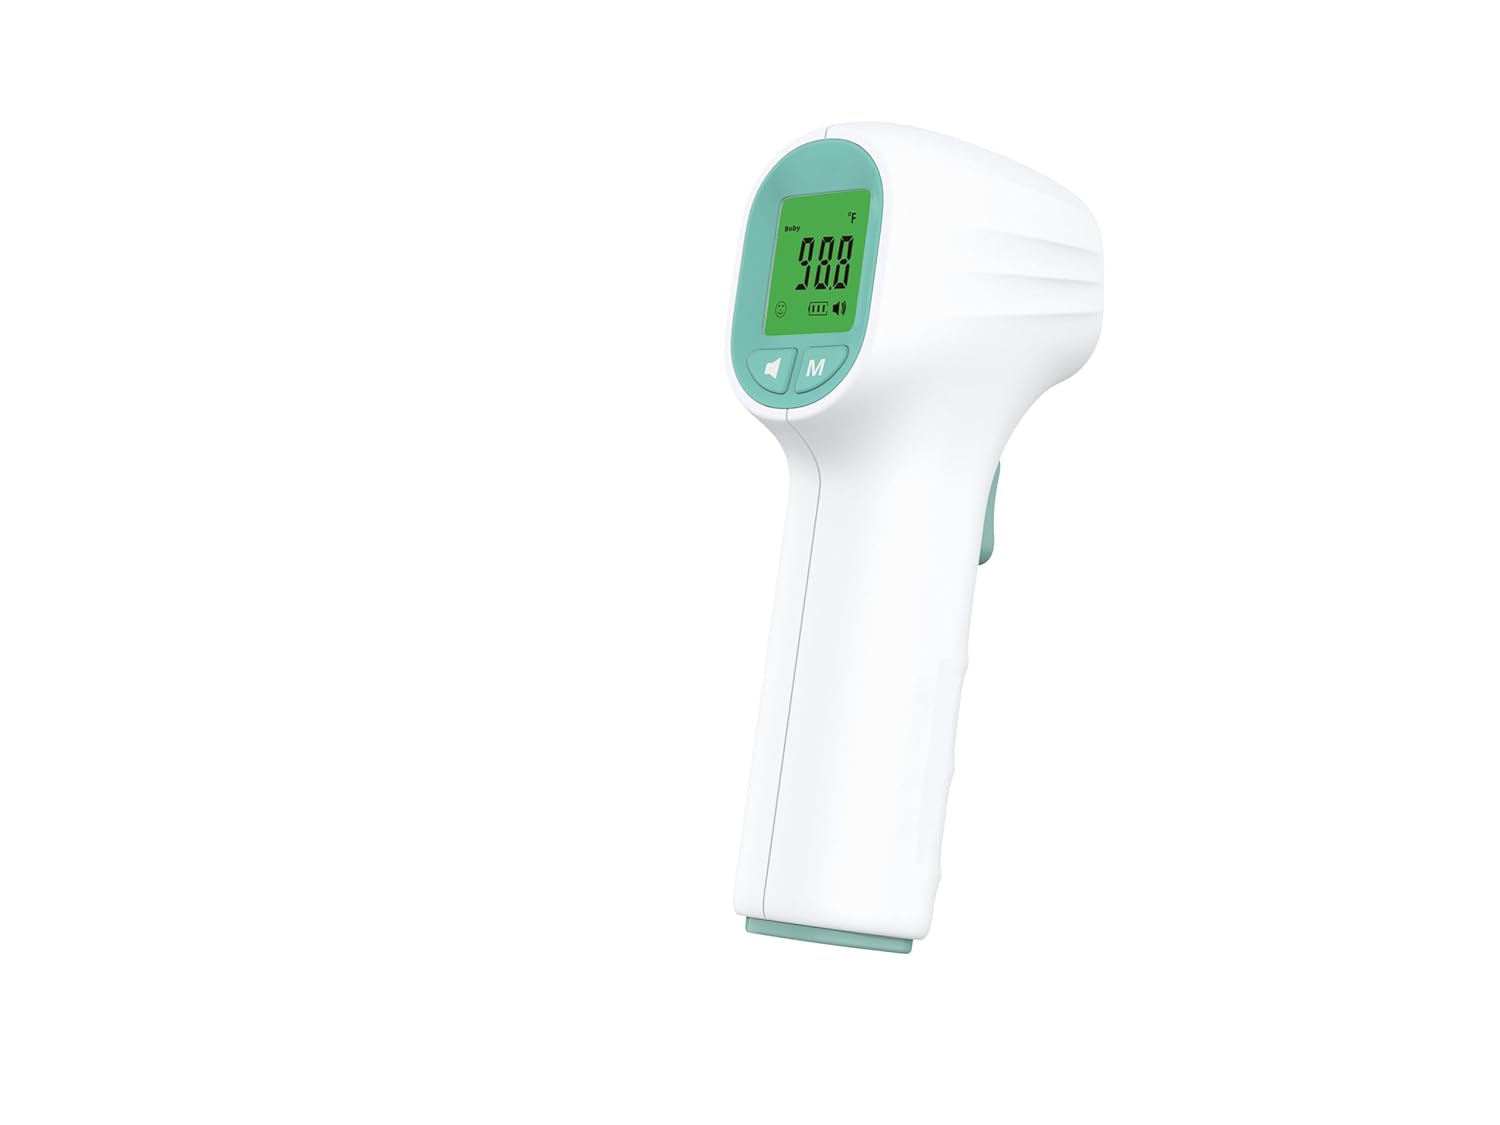 RoHS, Non-Contact Digital Infrared Thermometer for Adults, Kids, Babies, and Elderly